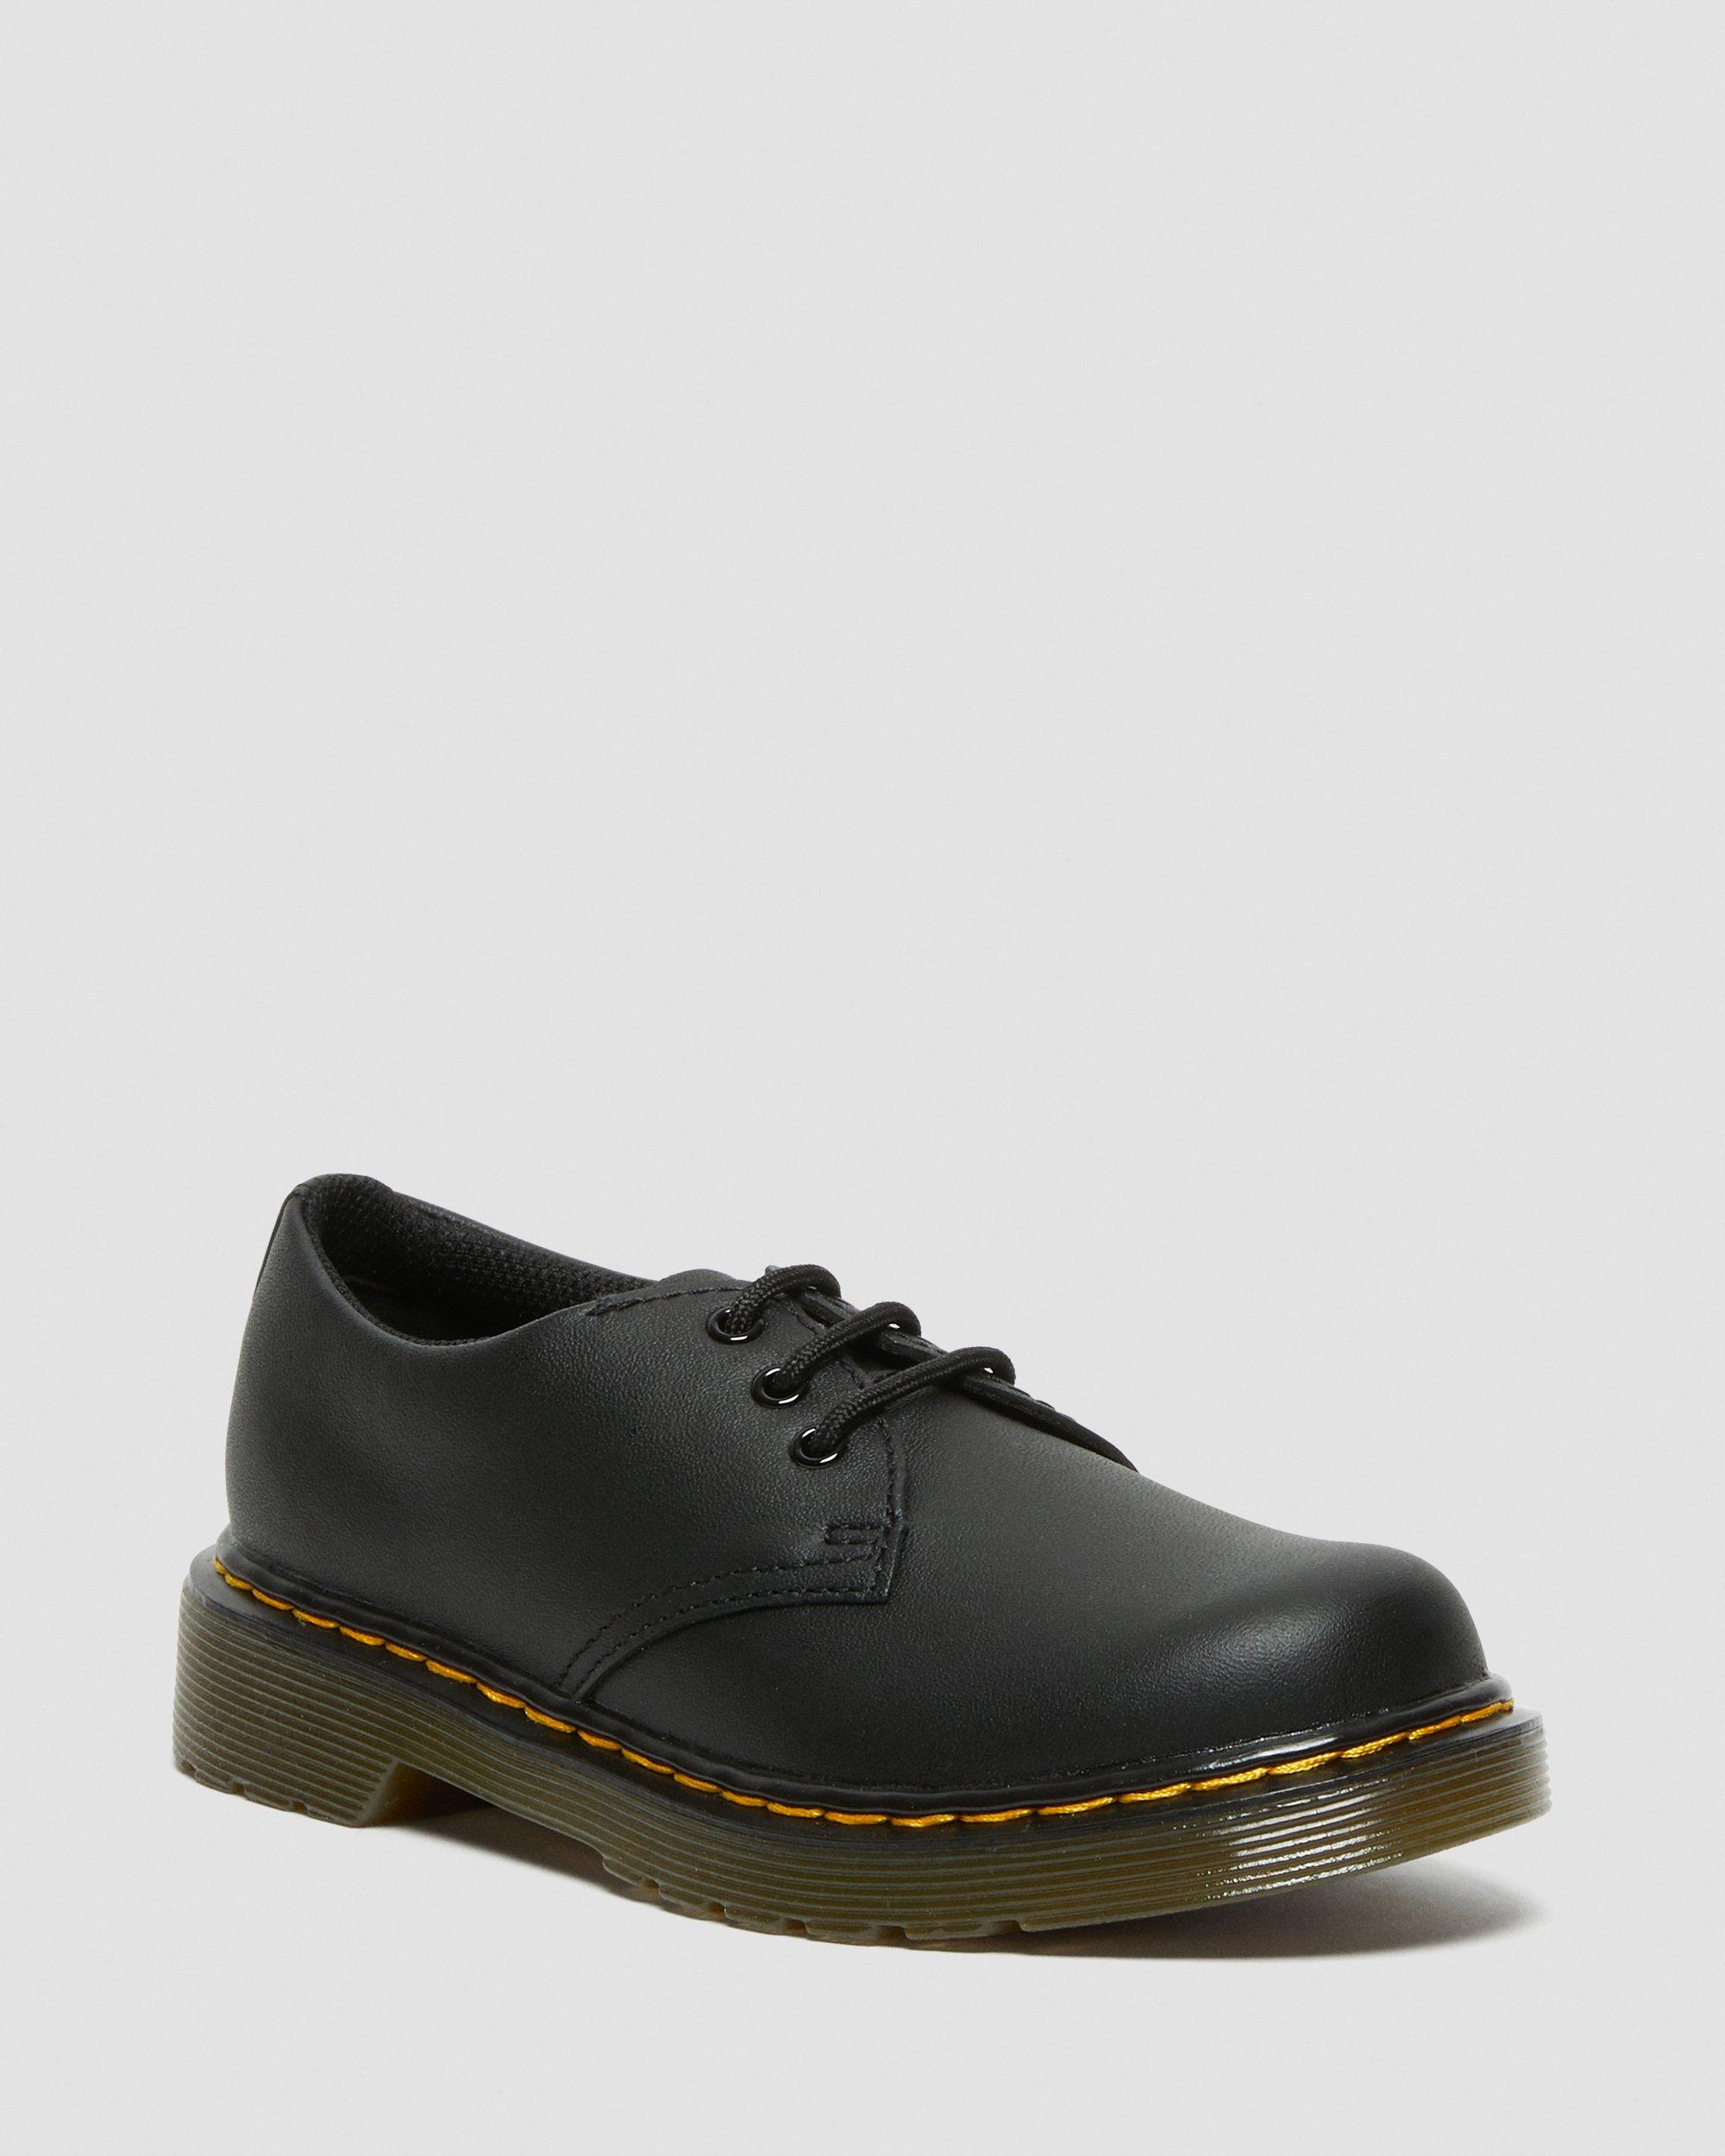 JUNIOR 1461 SOFTY T LEATHER SHOES | Dr 